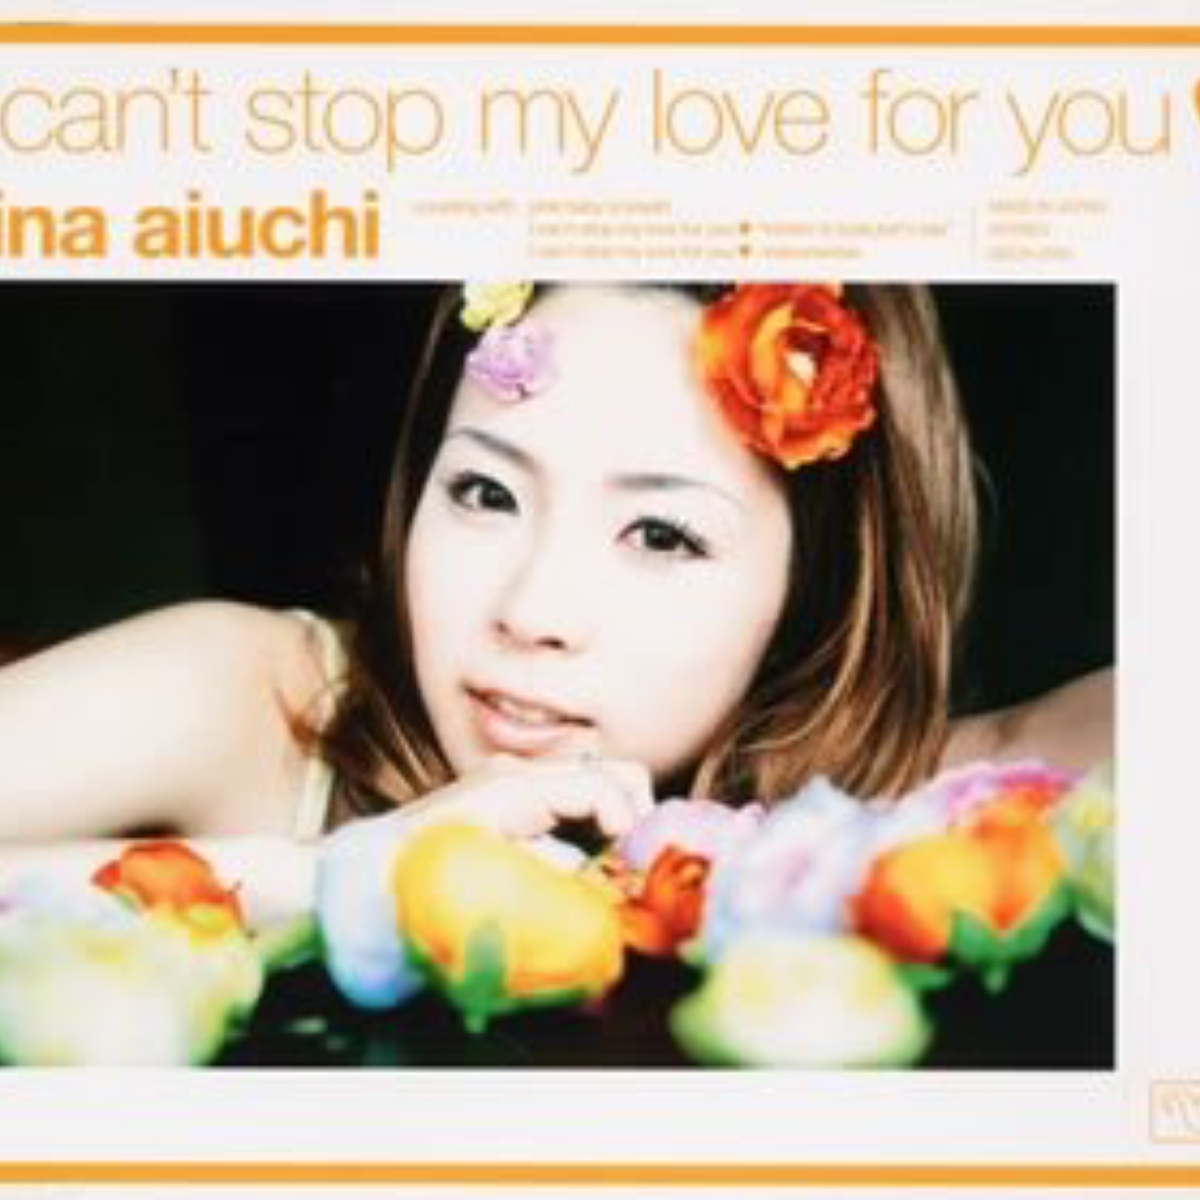 Rina Aiuchi - I can't stop my love for you♥